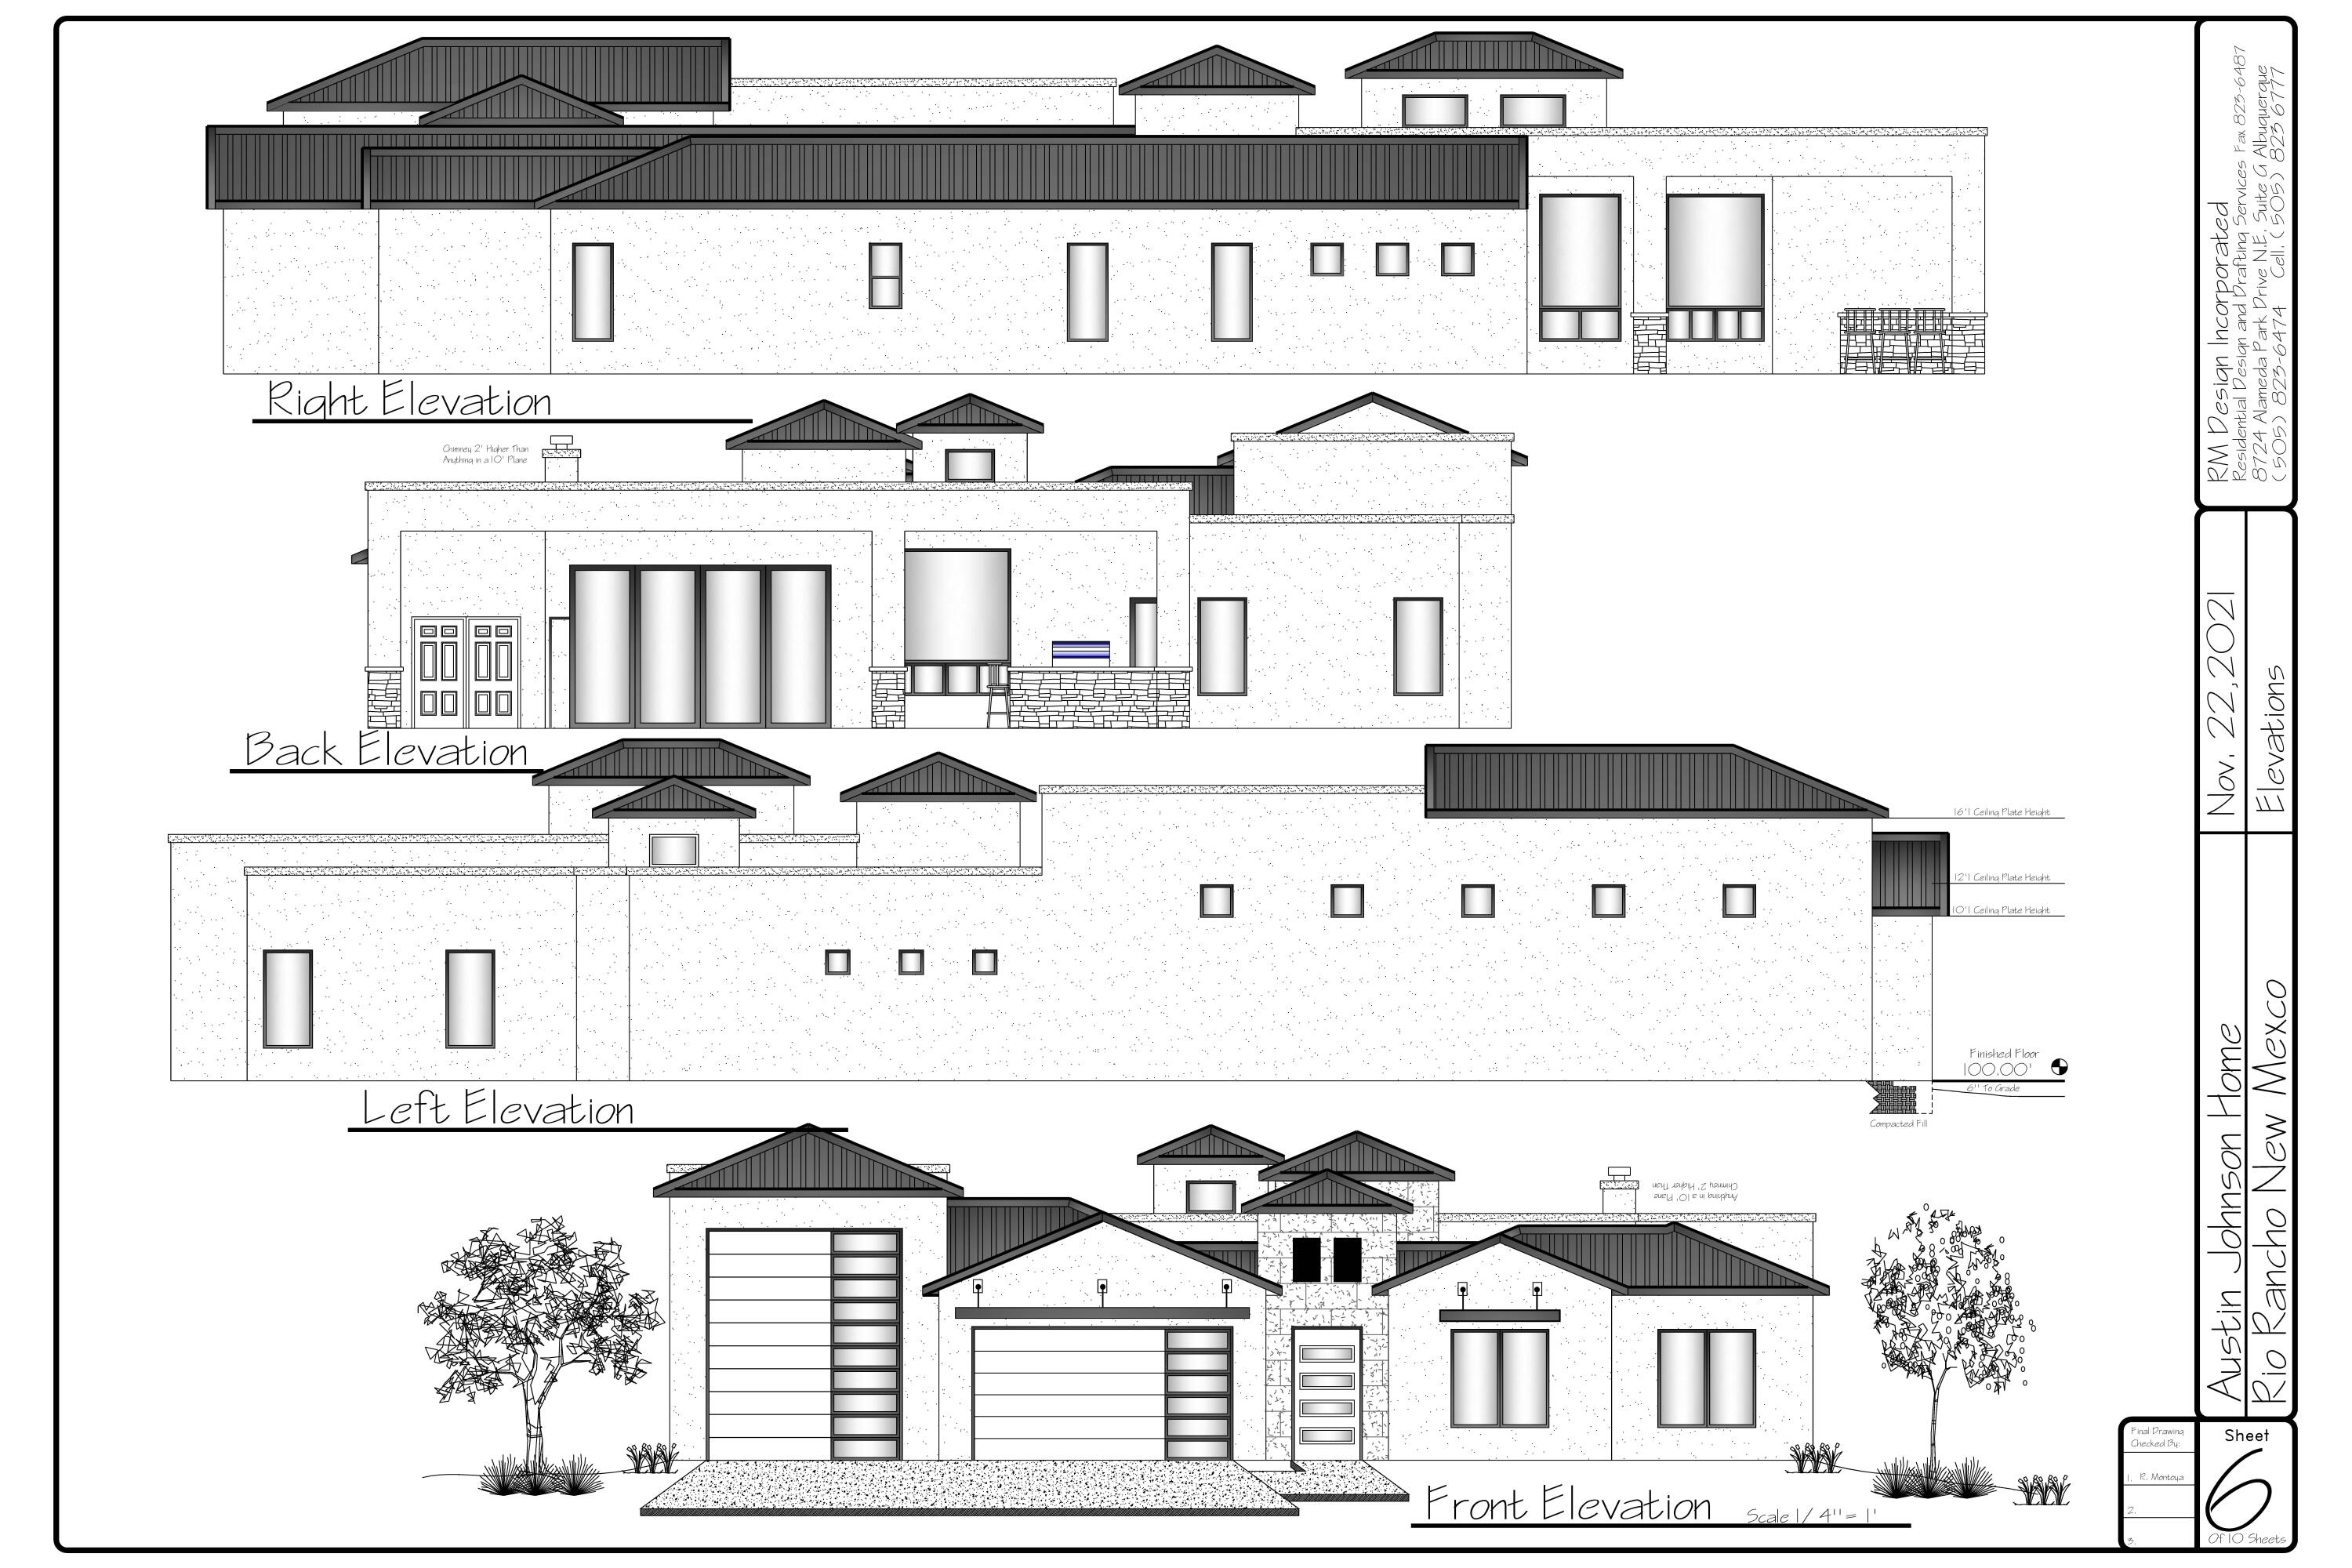 This brand new Crescent Custom Home is currently under construction, with a tentative completion date of January 2023. This home boasts 5 bedrooms with four and a half bathrooms. You will love having a dedicated RV garage to park your RV or toys! The home also offers a casita that is attached to the home. The large covered porch will be great for entertaining with the built in outdoor BBQ and kitchen! Tons of outdoor square footage with this half acre lot. The Kitchen is open to the family room and has a huge island with a pass through bakers pantry close by. At the entry, there will be a gate tower with a gate that leads to the courtyard, which leads to front entry door.